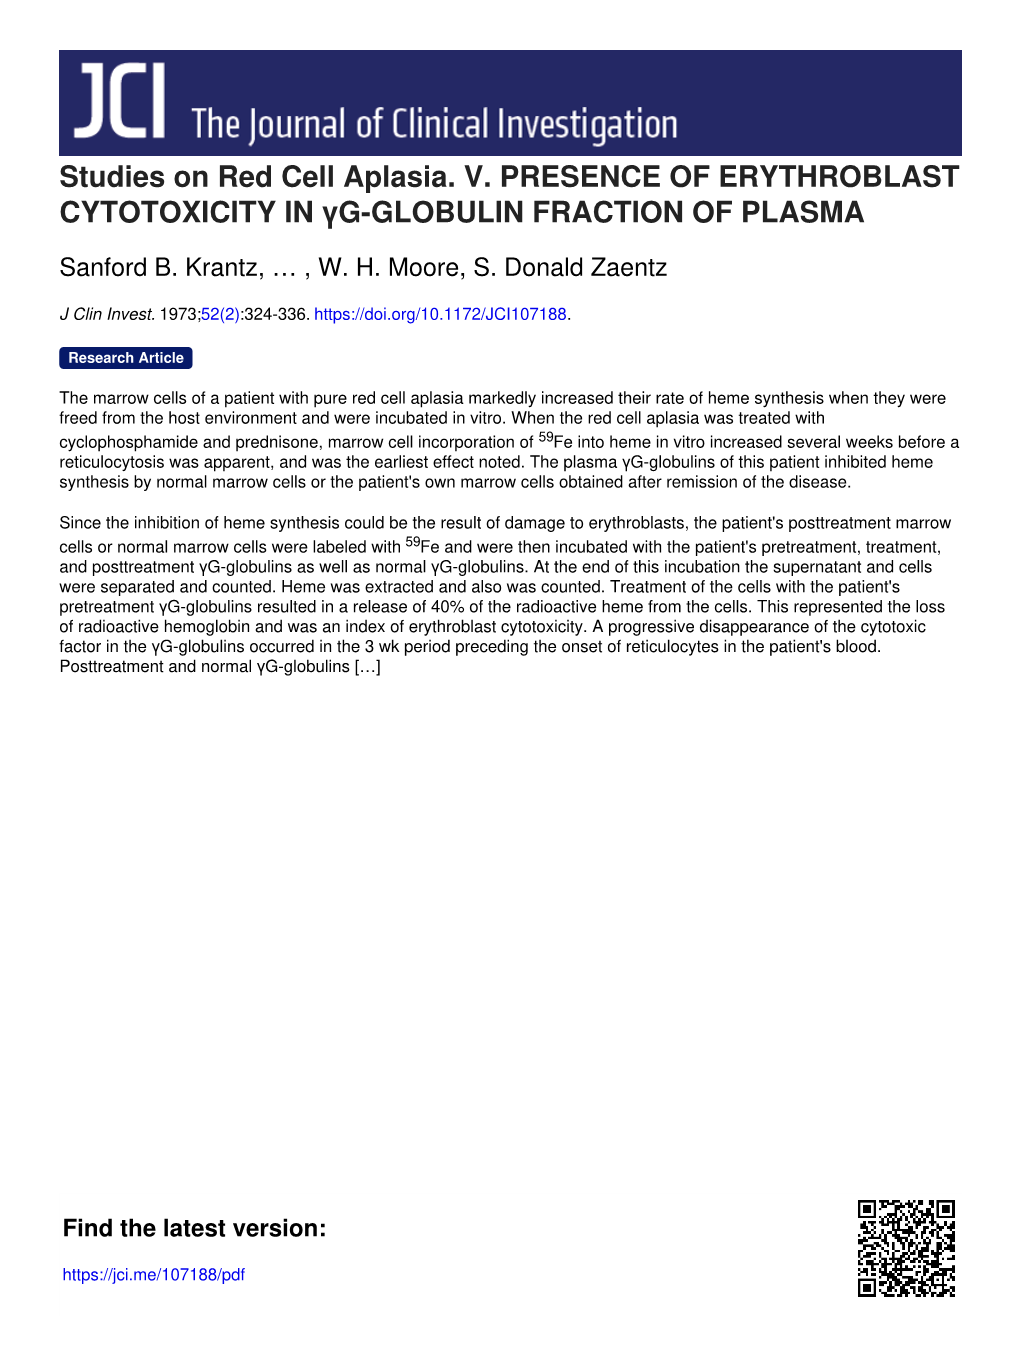 Studies on Red Cell Aplasia. V. PRESENCE of ERYTHROBLAST CYTOTOXICITY in Γg-GLOBULIN FRACTION of PLASMA